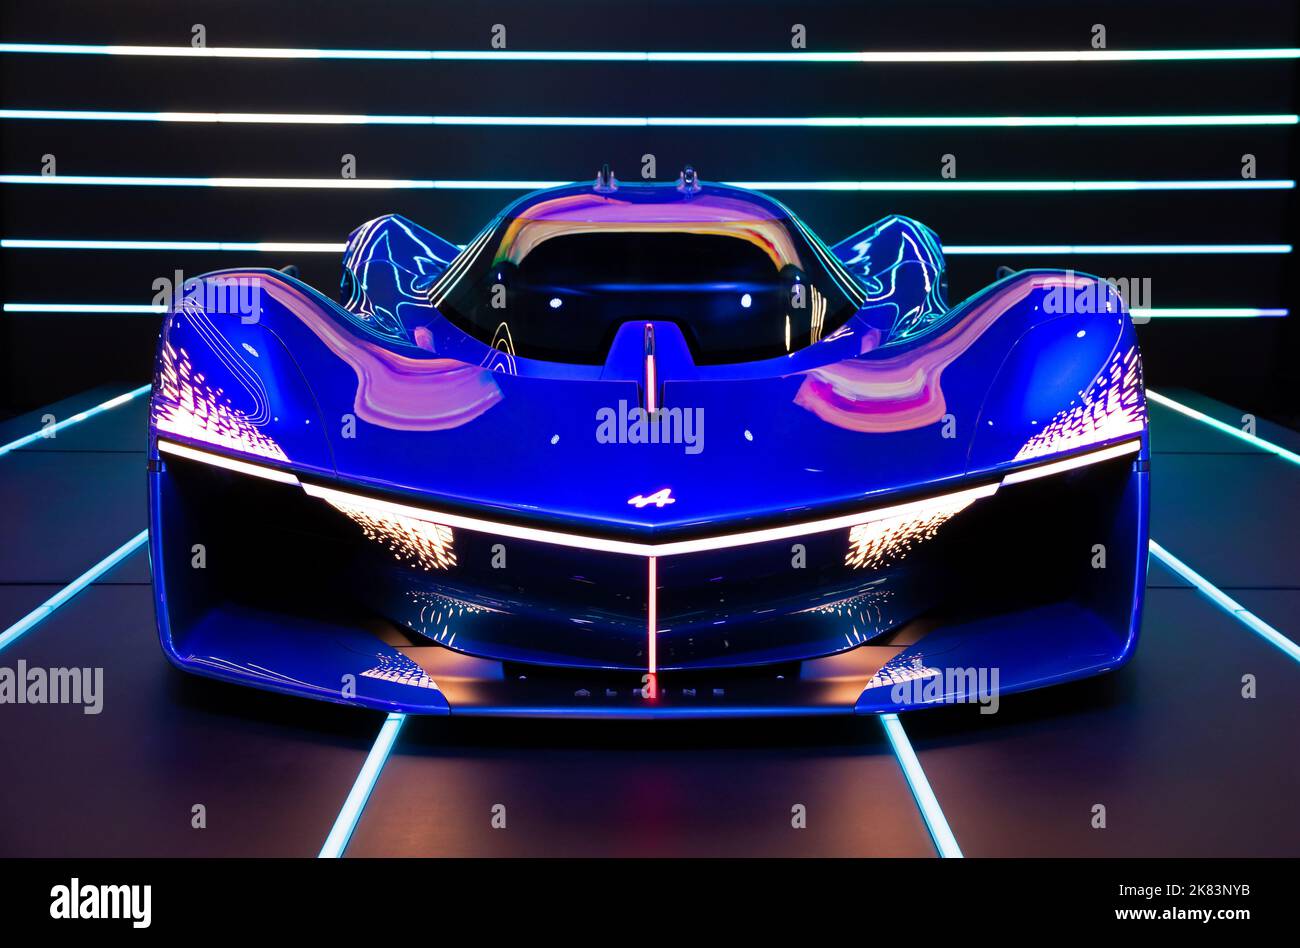 Alpine Alpenglow hydrogen powered sports car showcased at the Paris Motor Show, France - October 17, 2022. Stock Photo